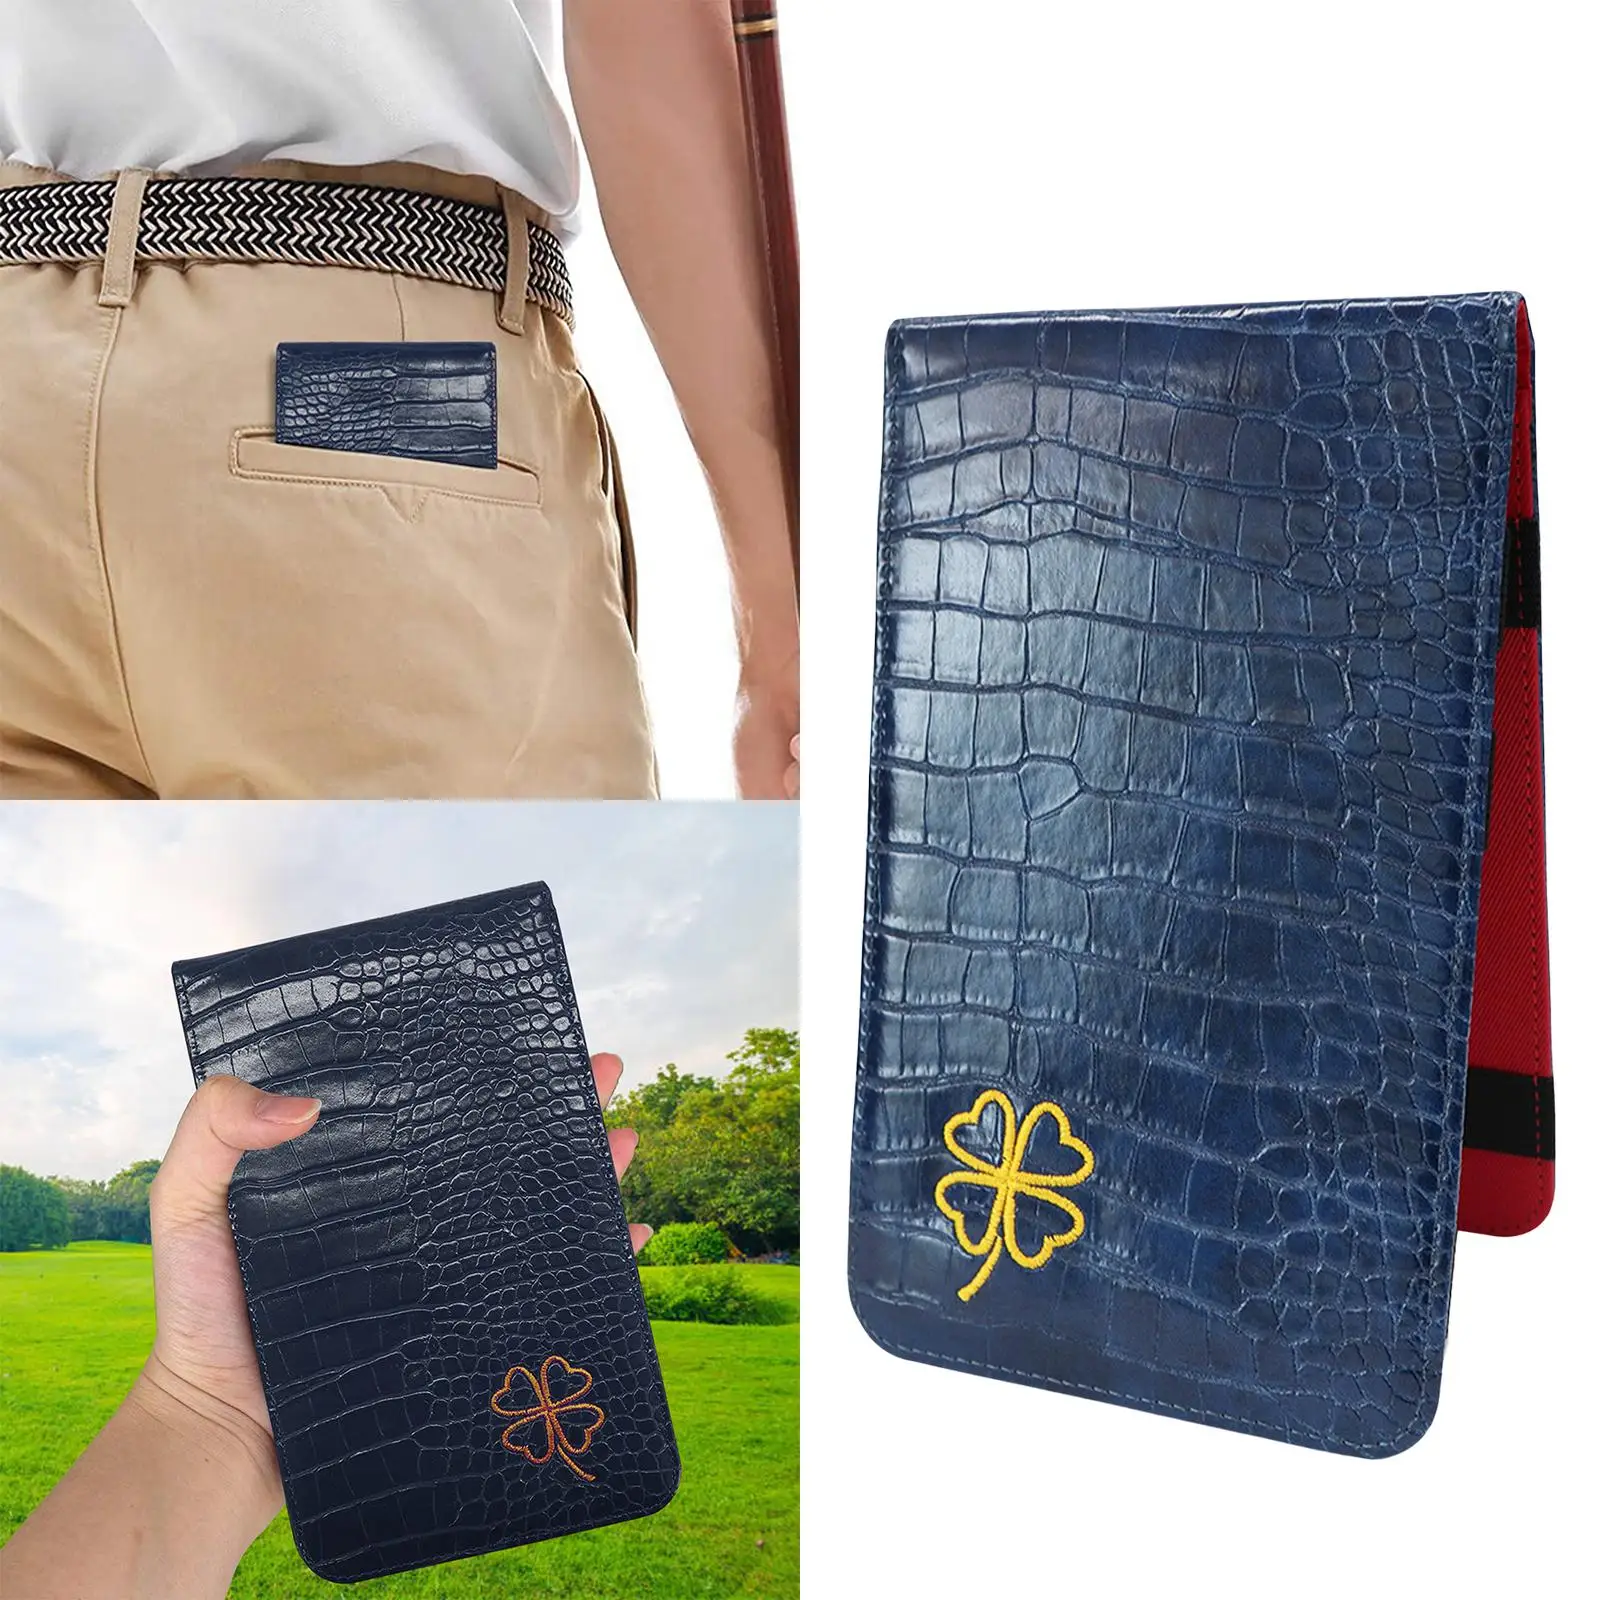 Yardage Book Cover Golf Score Cards Wallet with Pencil Loop with Elastic Bands Golf Scorecard Holder for Golfer Family Birthday